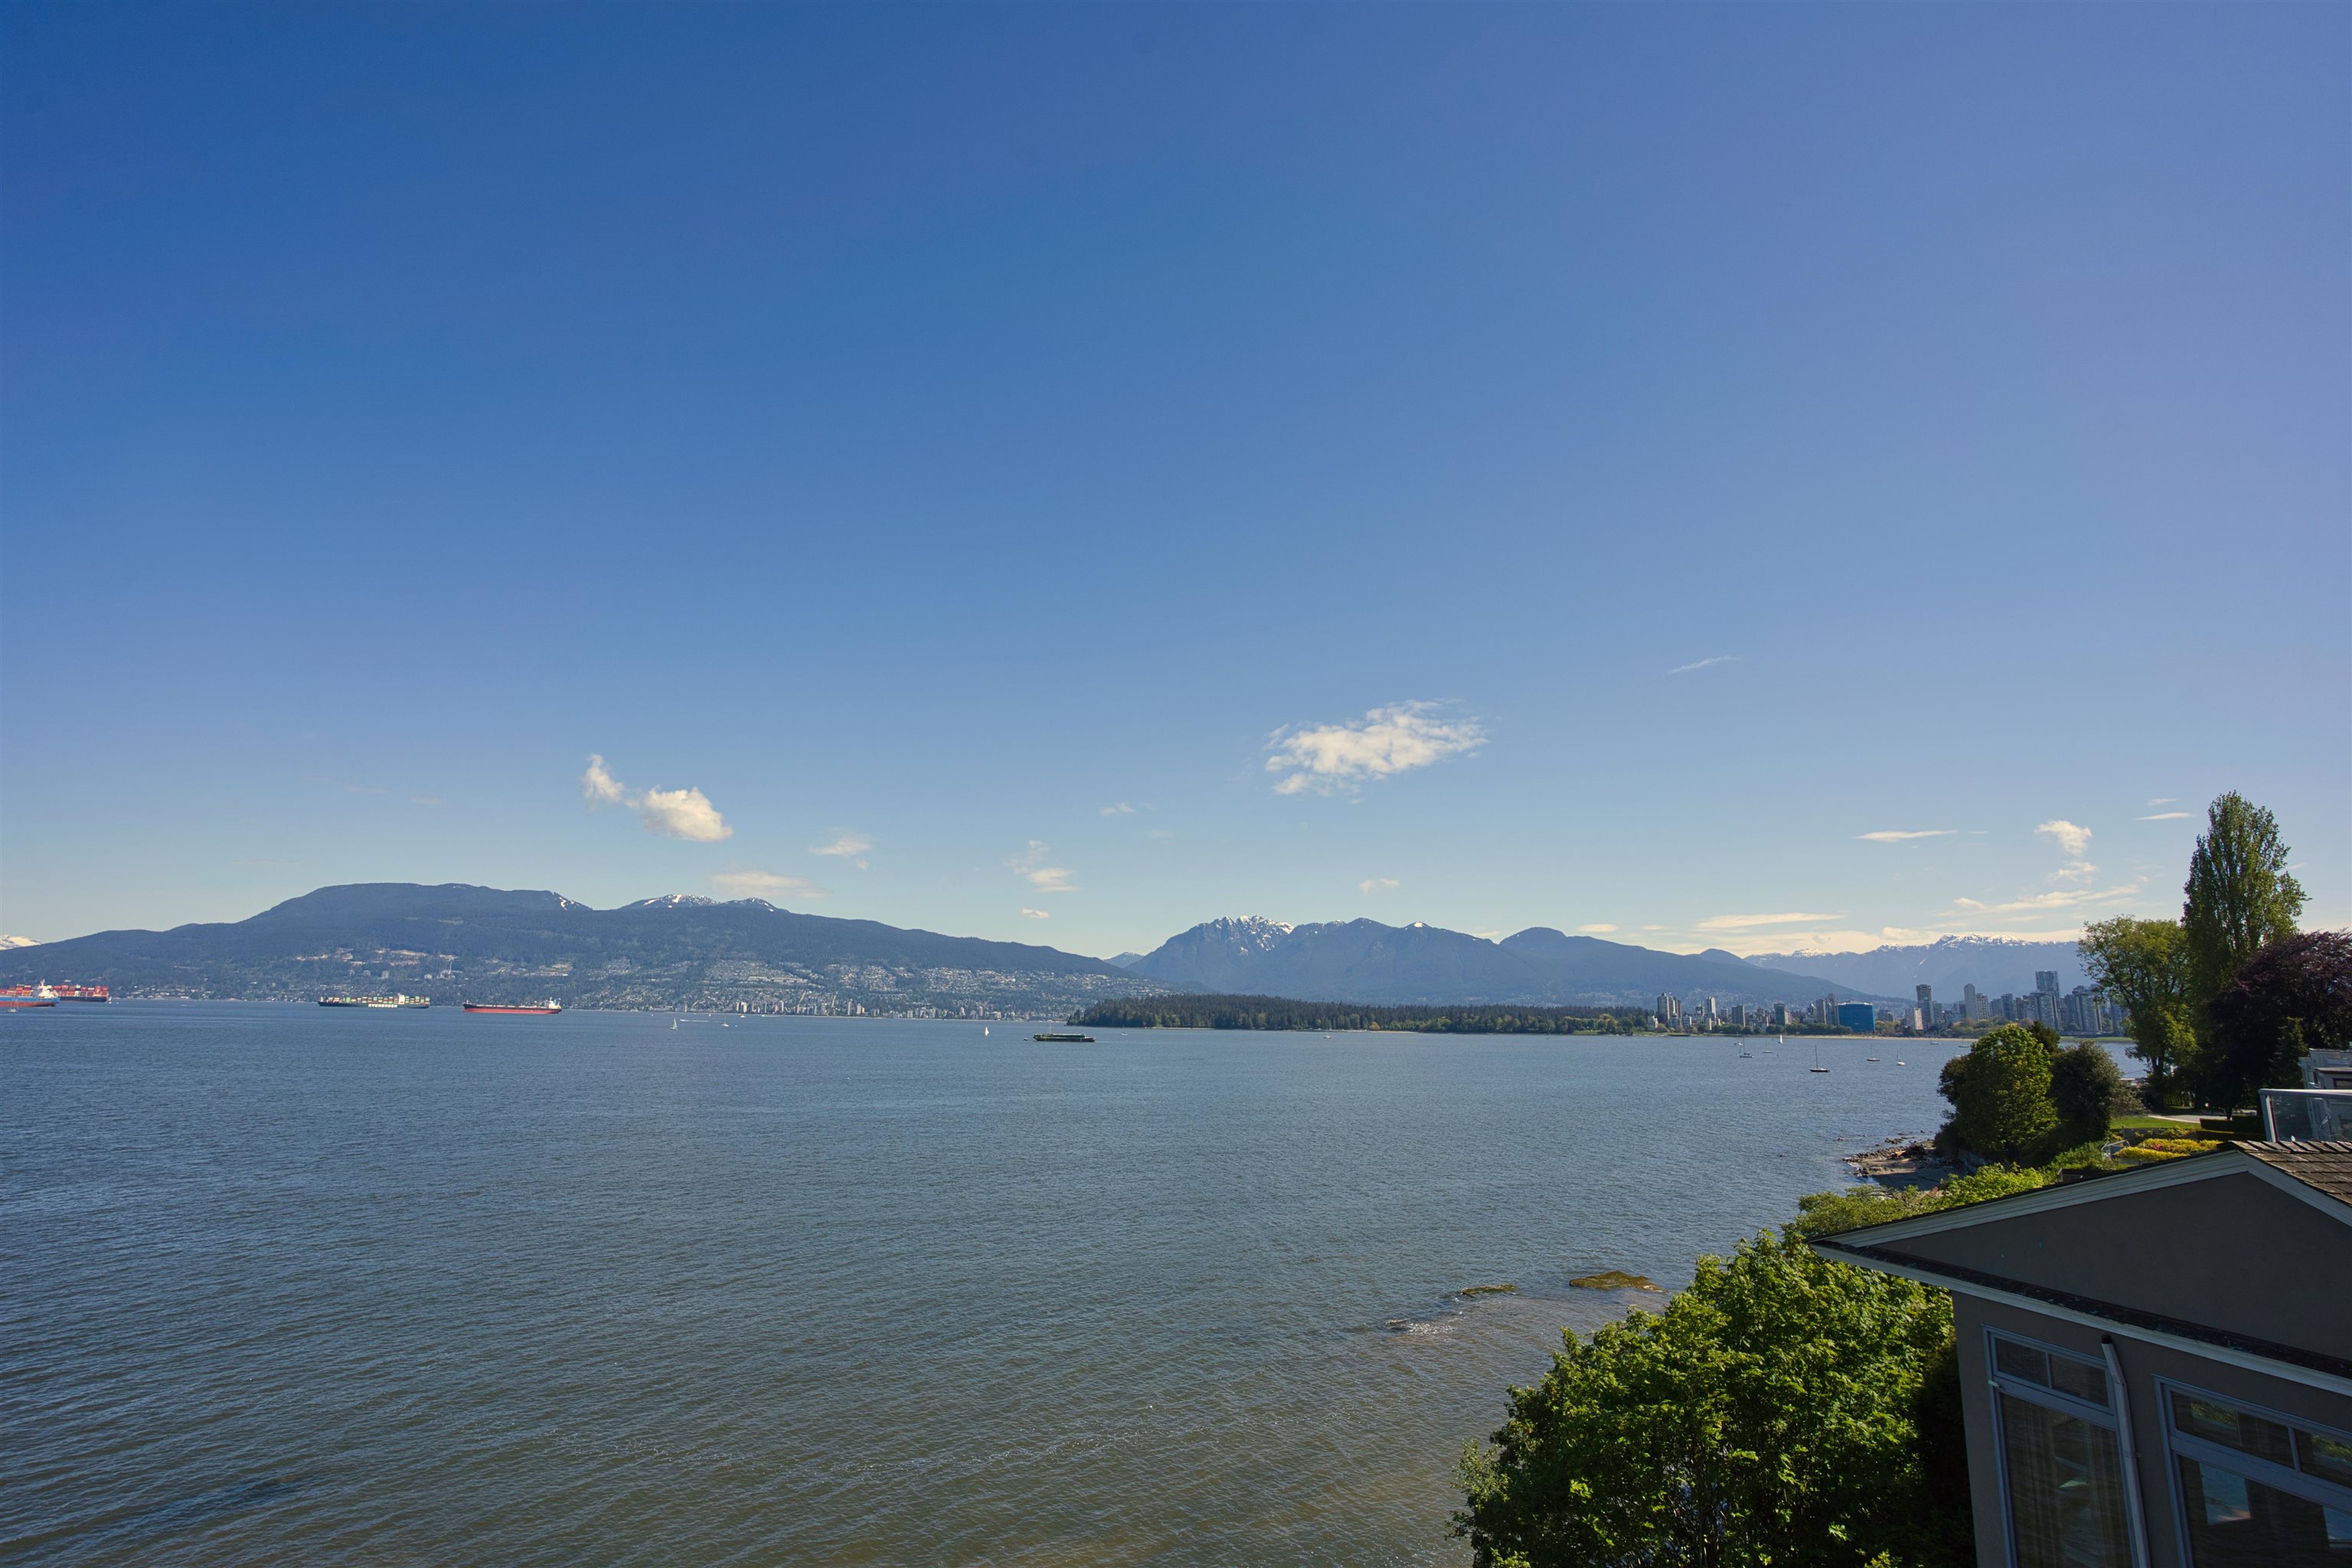 2711 POINT GREY ROAD, Vancouver, BC V6K 1A4